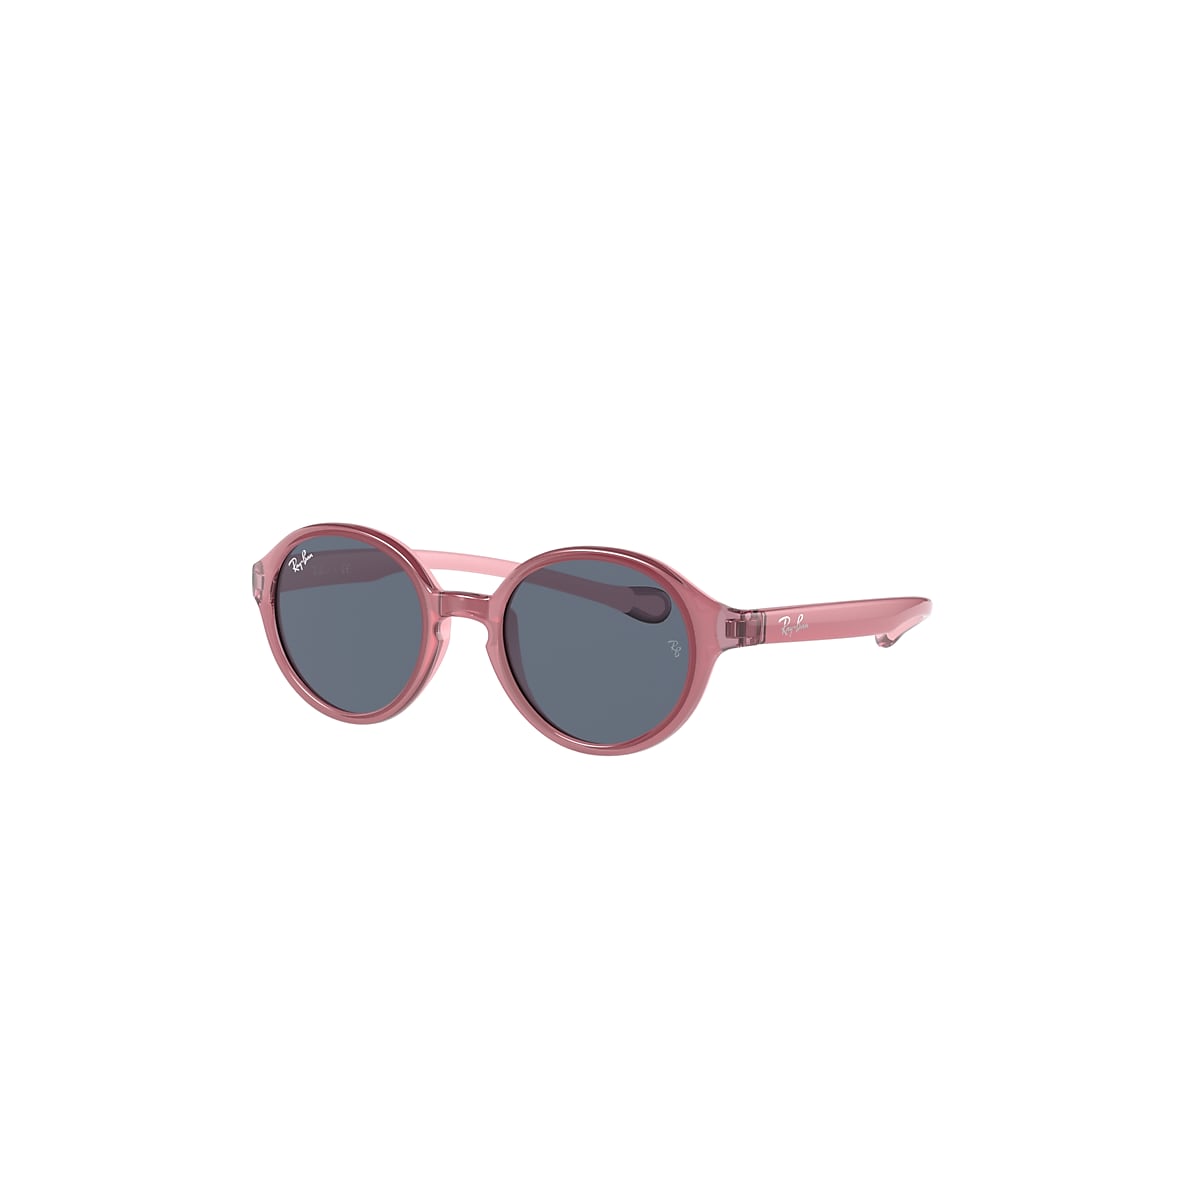 RB9075S KIDS Sunglasses in Fuchsia On Pink and Grey 